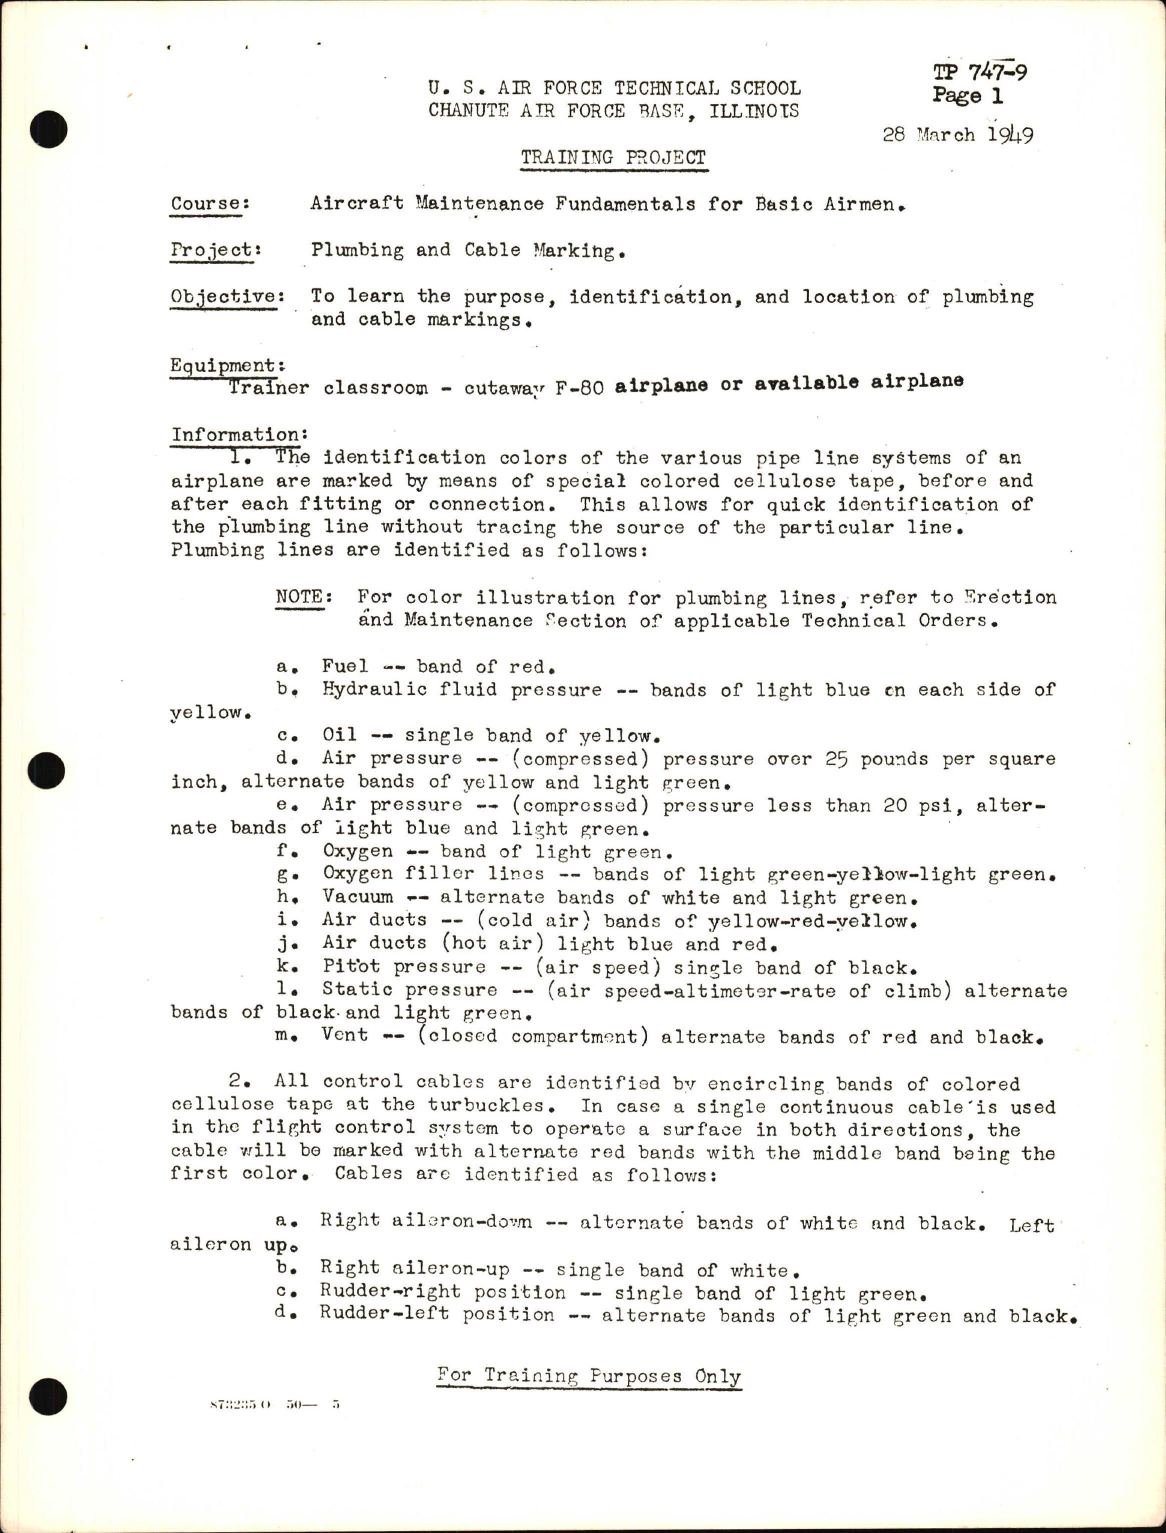 Sample page 1 from AirCorps Library document: Training Project, Plumbing and Cable Marking